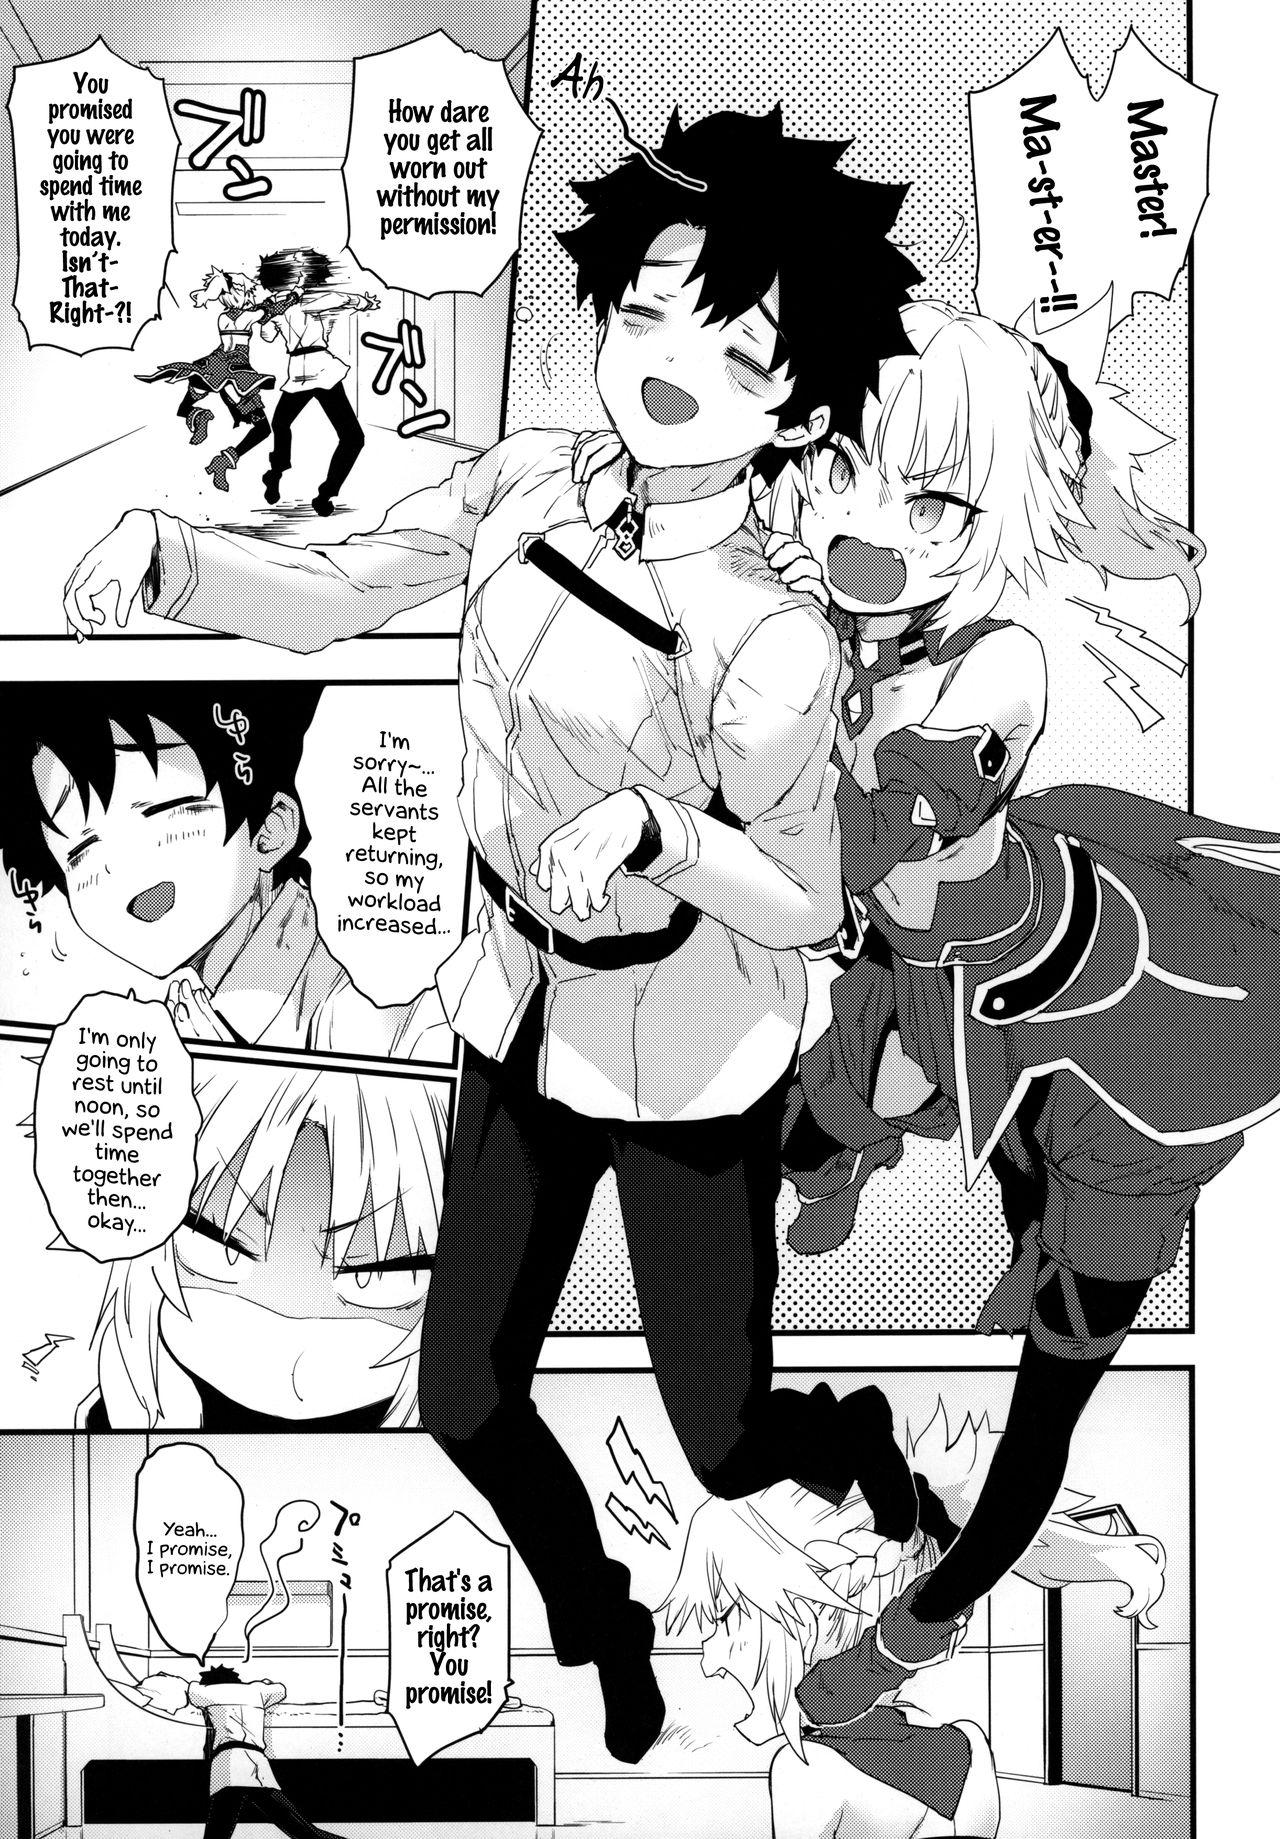 Tease Master no Sei da zo... | This is your fault Master... - Fate grand order Threeway - Page 2